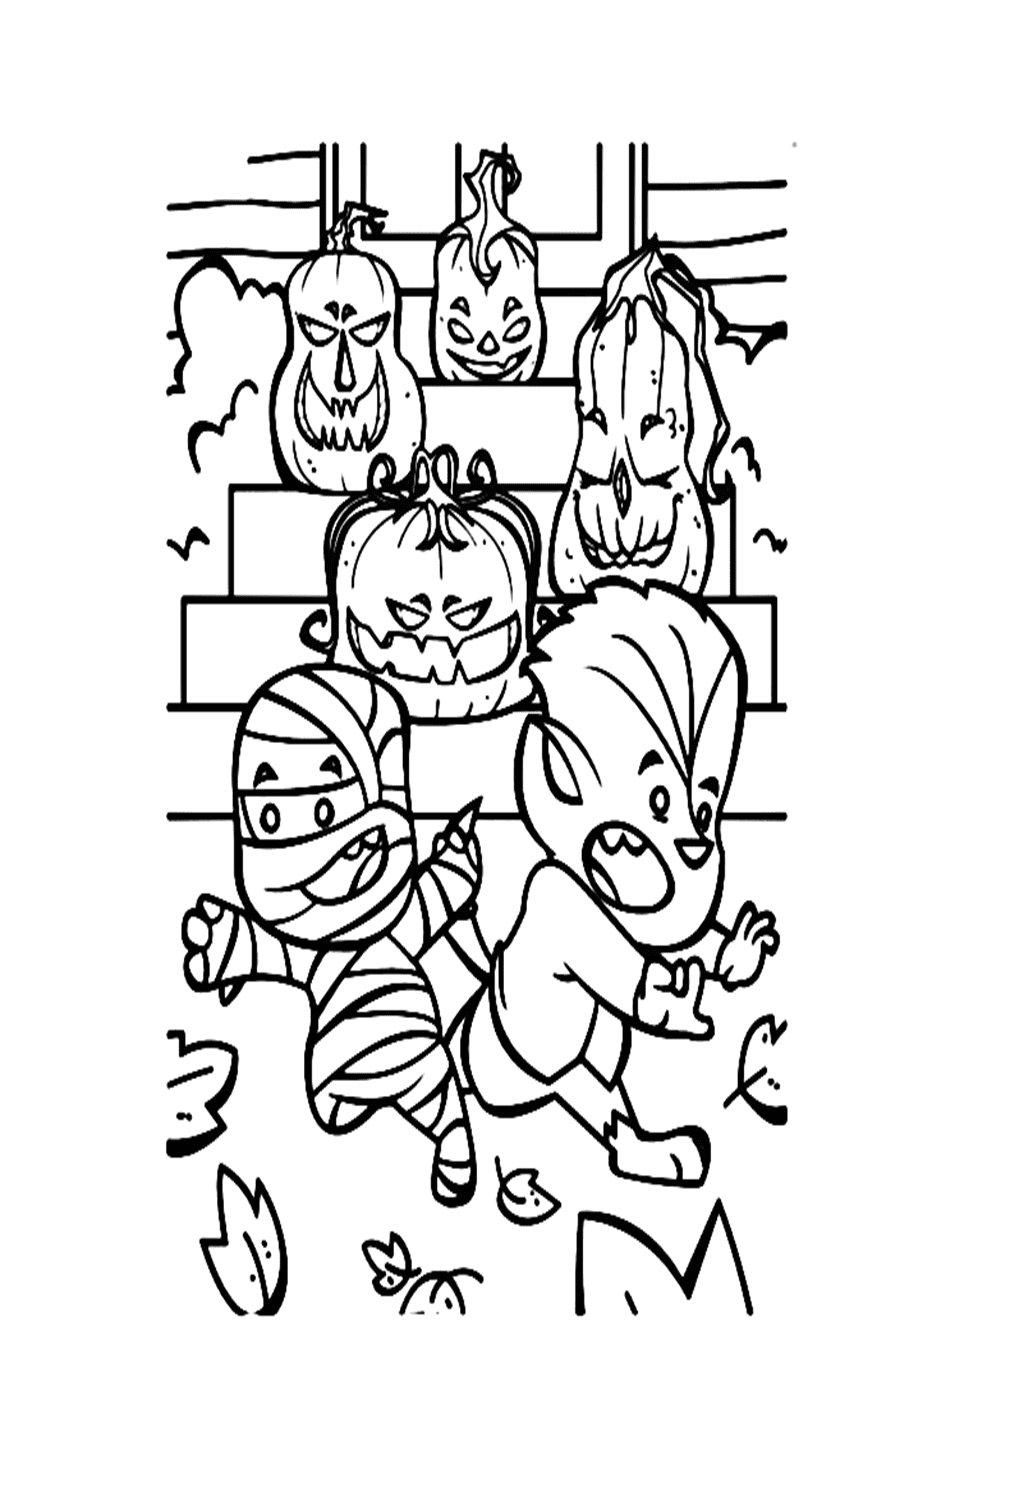 Funny Jack O’ Lanterns Coloring Pages